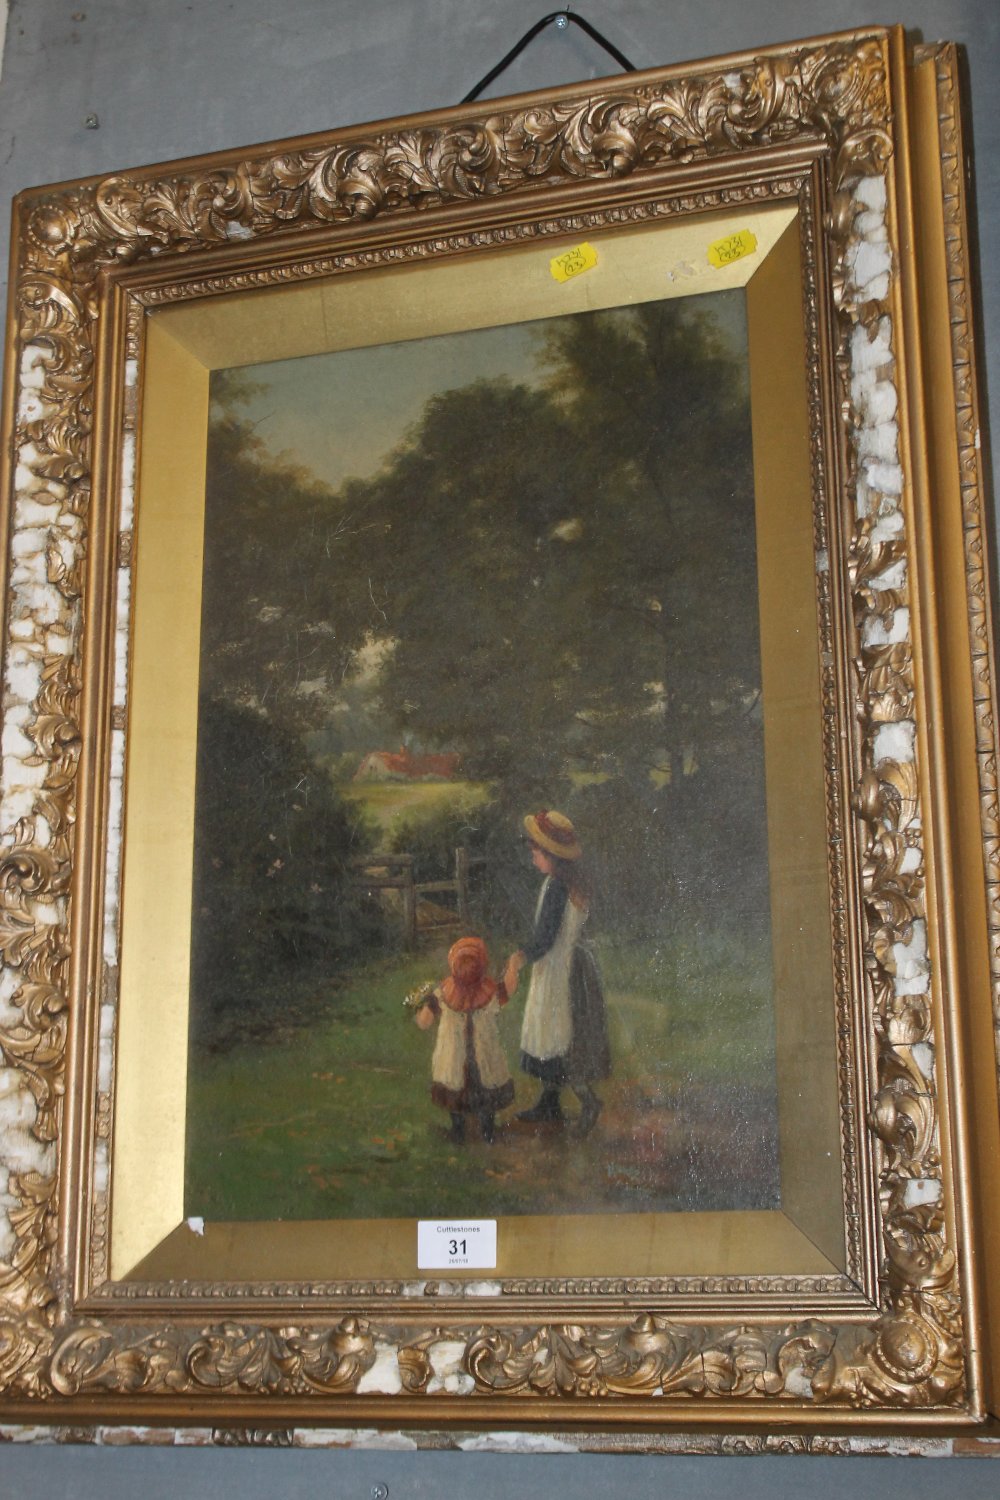 A LATE 19TH / EARLY 20TH CENTURY BRITISH SCHOOL rural wooded landscape with two children by a wooded